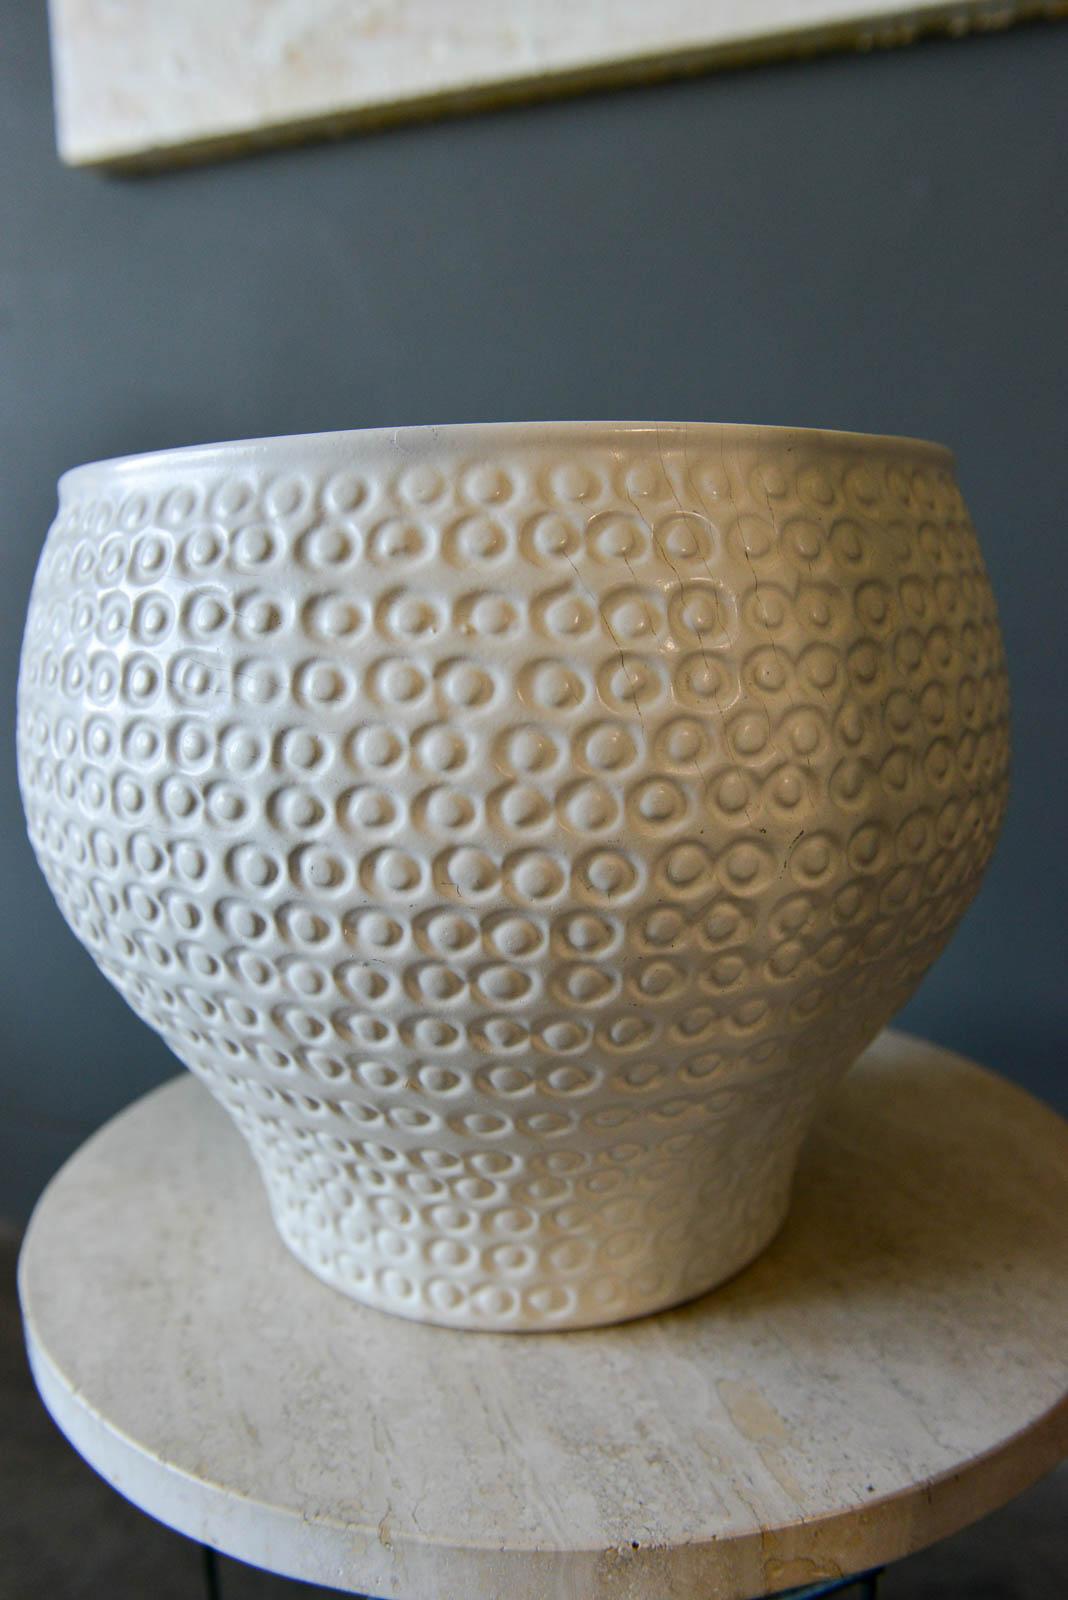 Vintage David Cressey for Architectural Pottery Pro/Artisan Series 'Cheerio' pattern planter in ivory glaze. One drain hole on bottom.

Measures 14